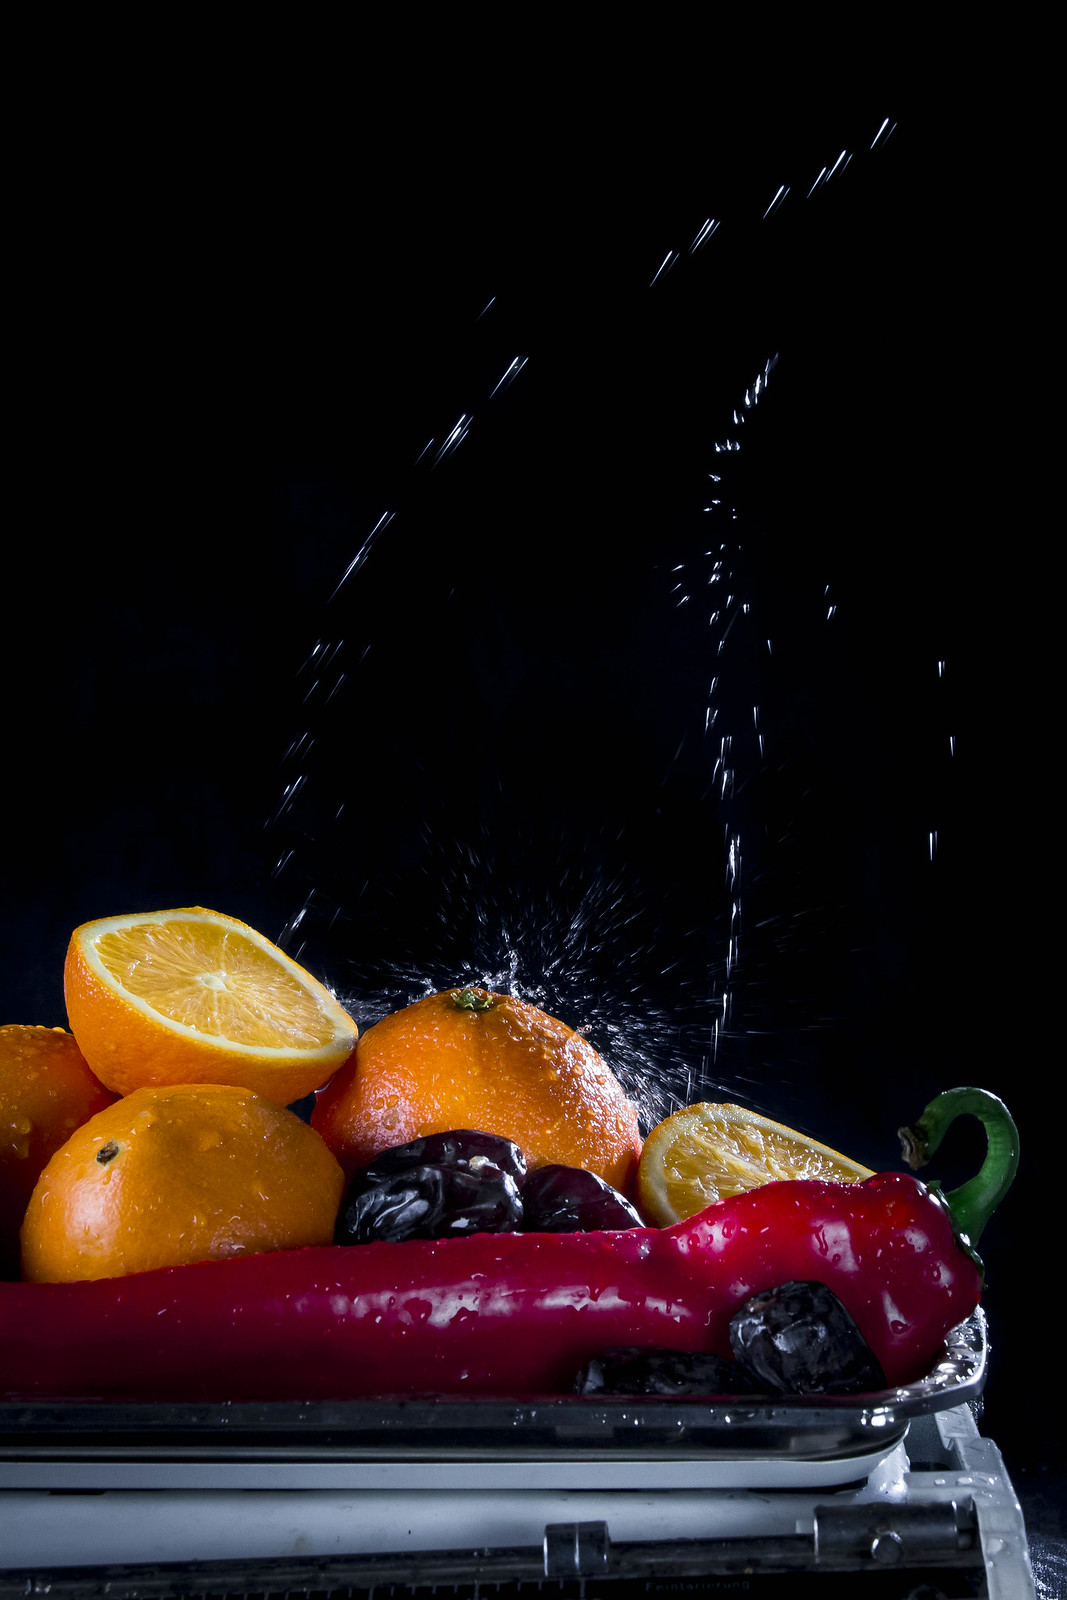 Vegetables / Food photography